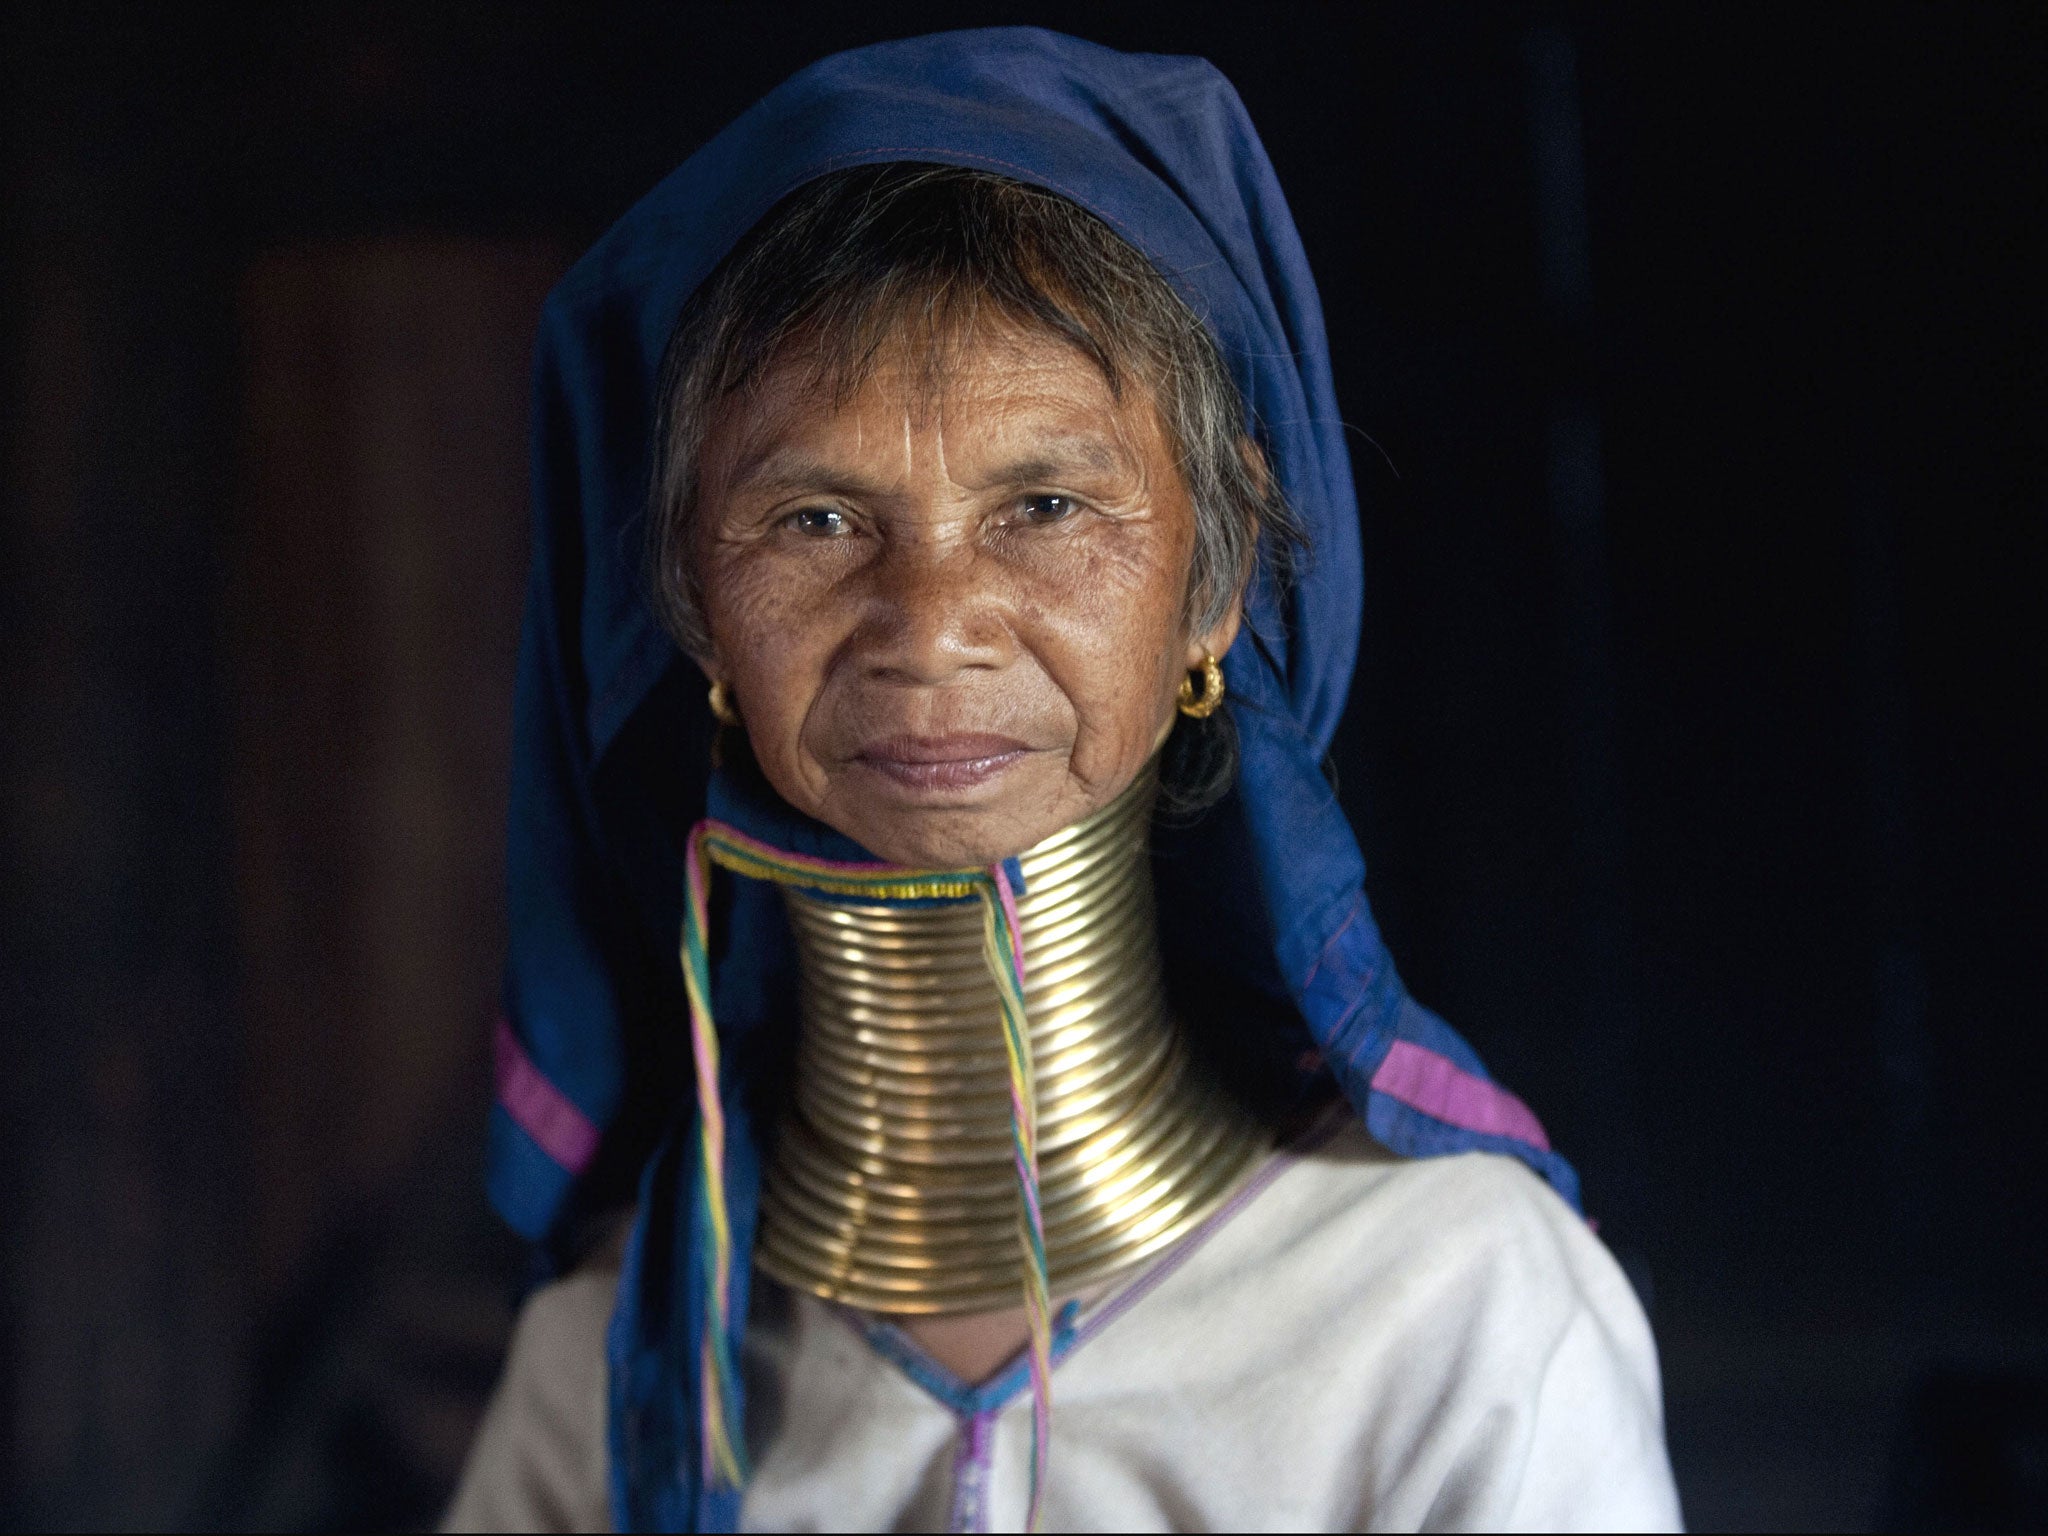 Women of the Kayan tribes identify themselves by their forms of dress. Women of the Kayan Lahwi tribe are well known for wearing neck rings, brass coils that are placed around the neck, appearing to lengthen it. The women wearing these coils are known as